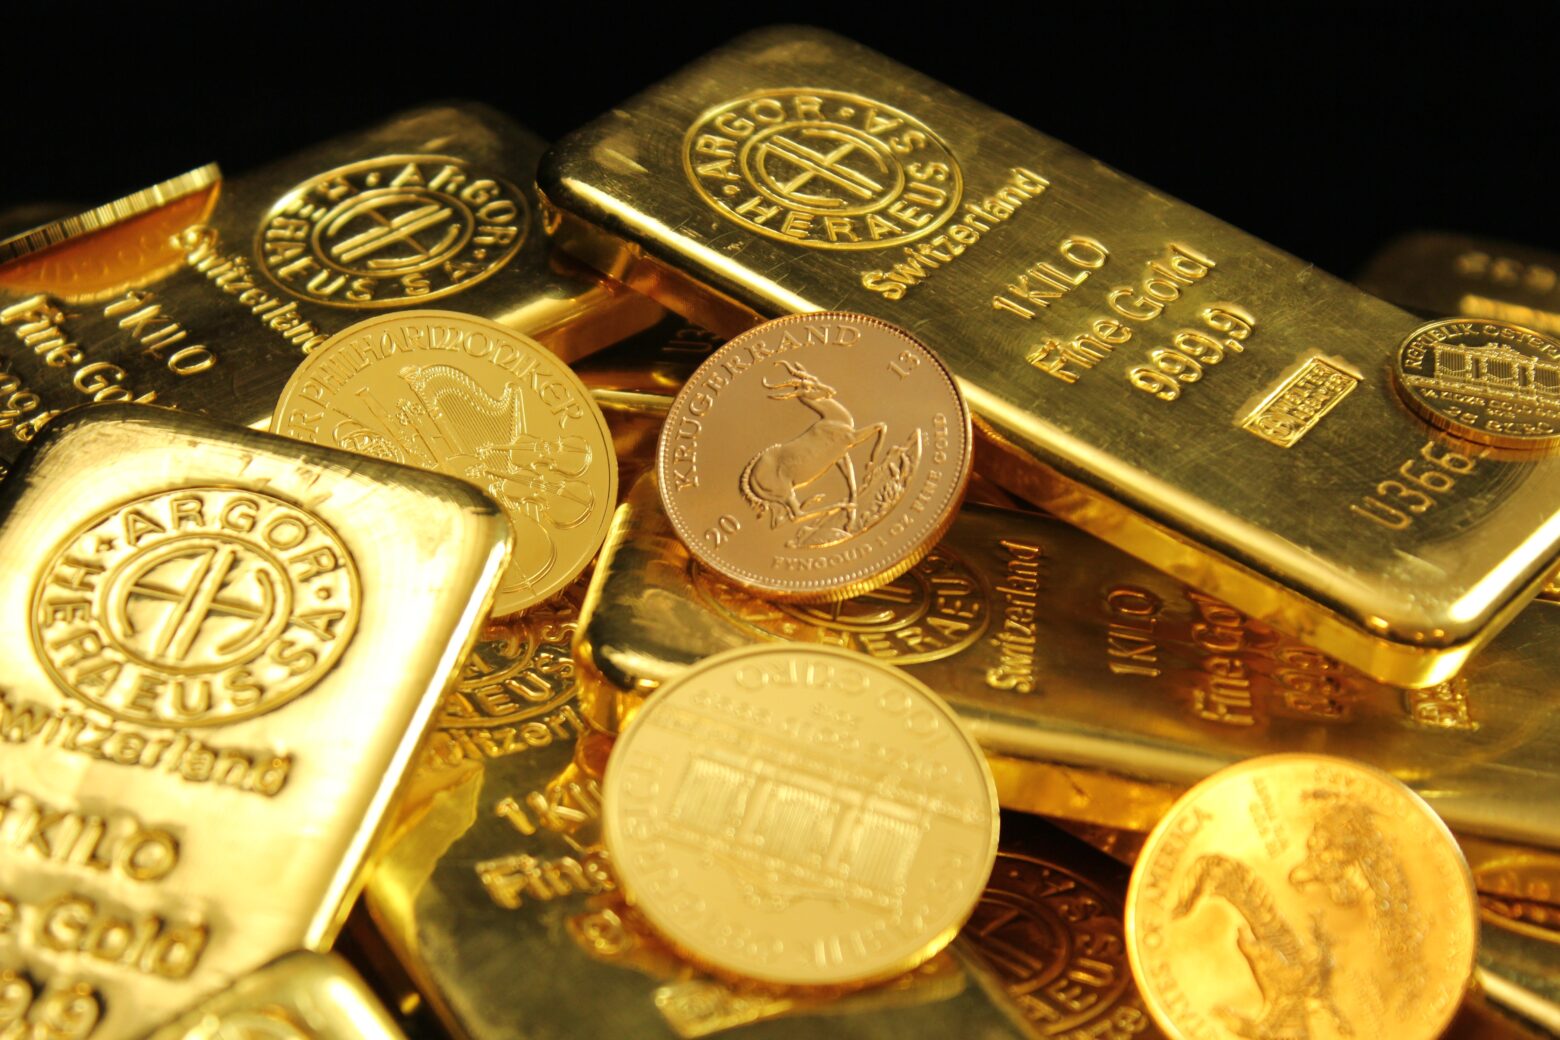 Diversifying 401(k) Plans With Gold Investments A Smart Strategy?